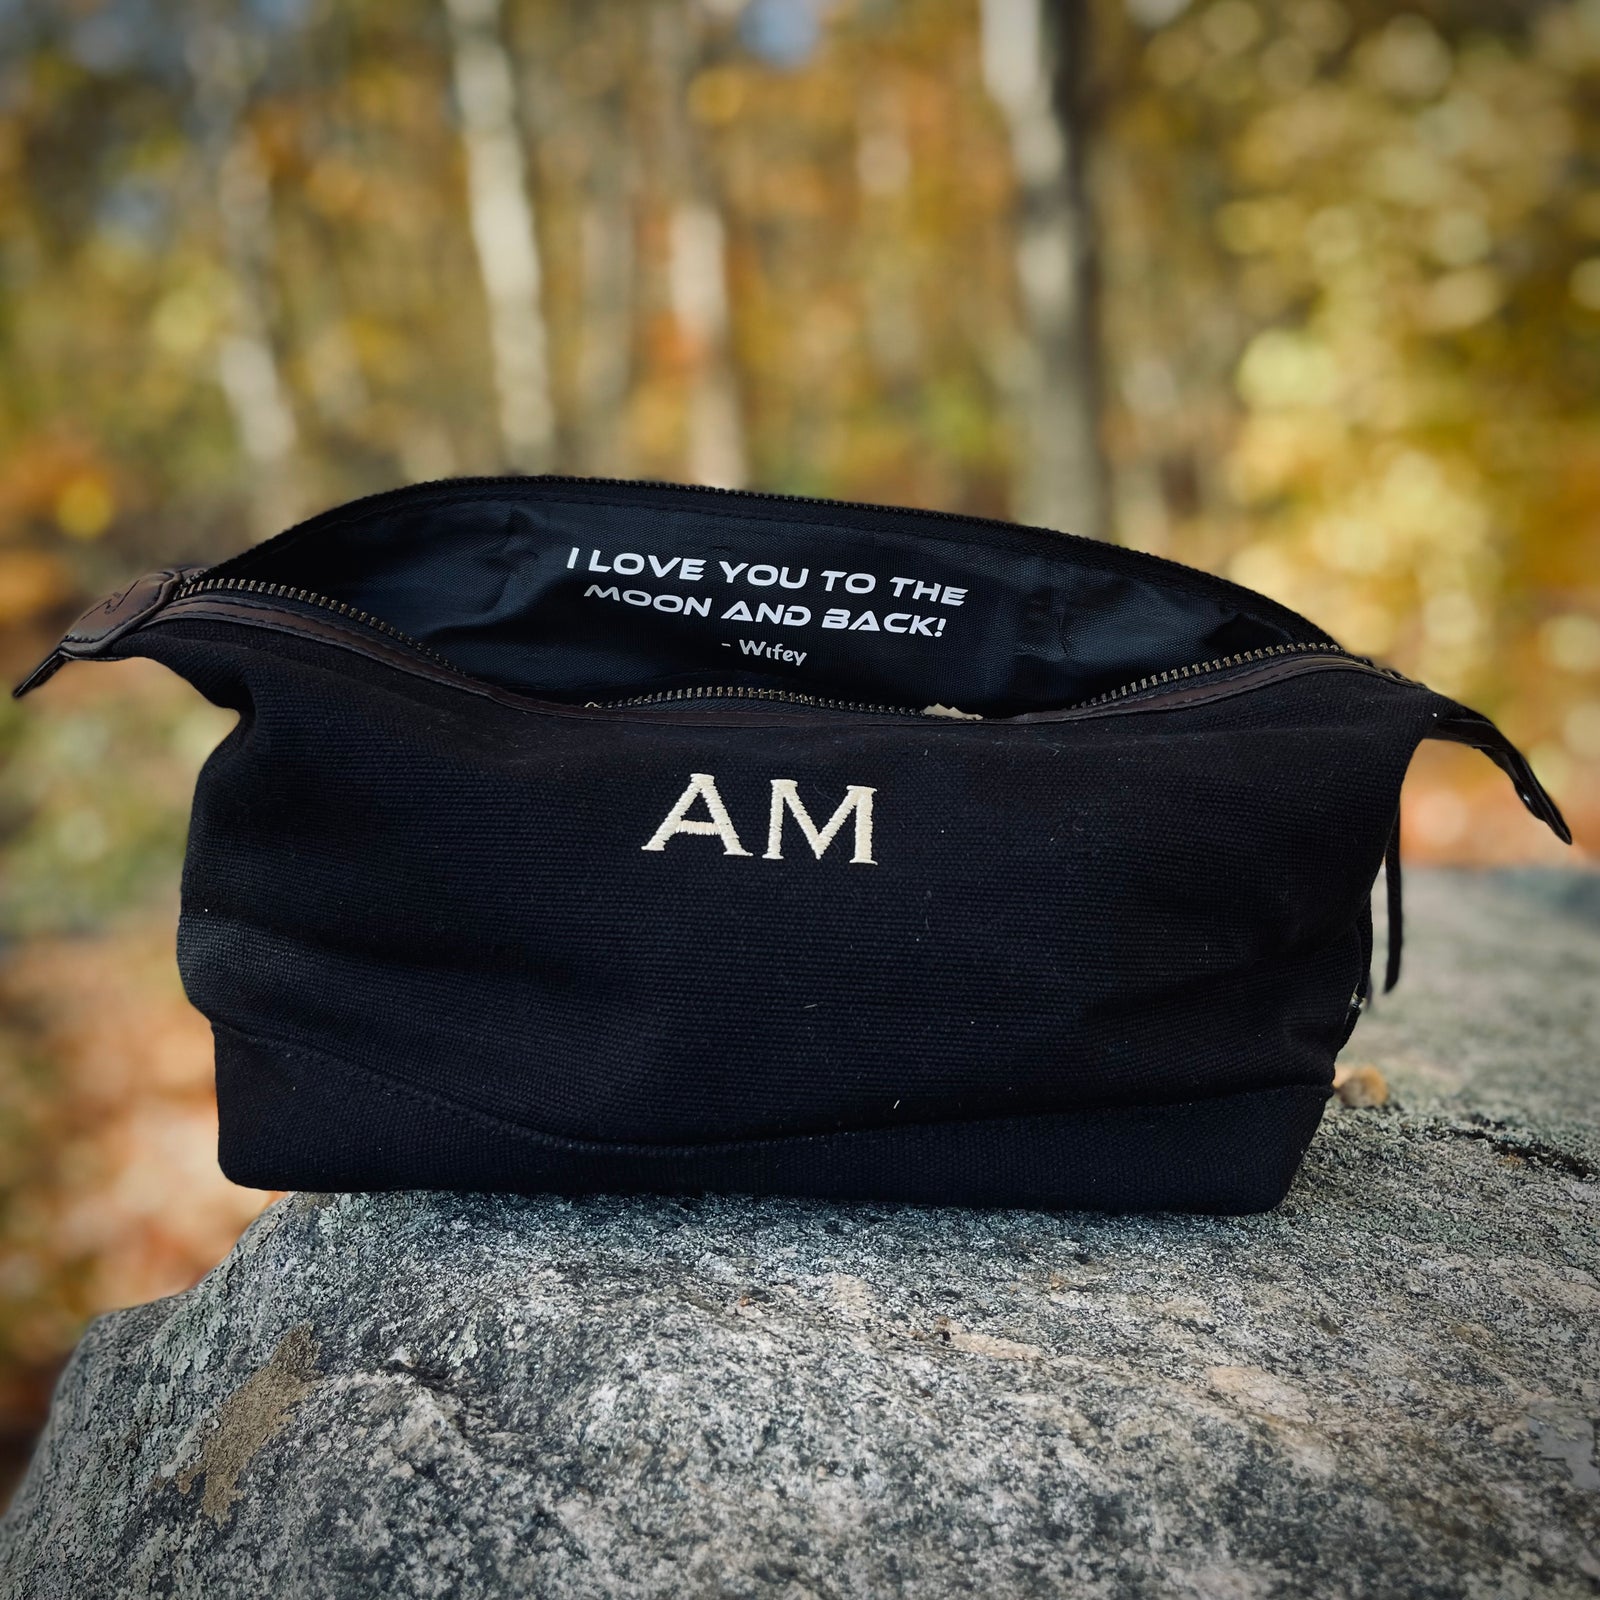 29 Unique Personalized Toiletry Bags for Men (from $25) - Groovy